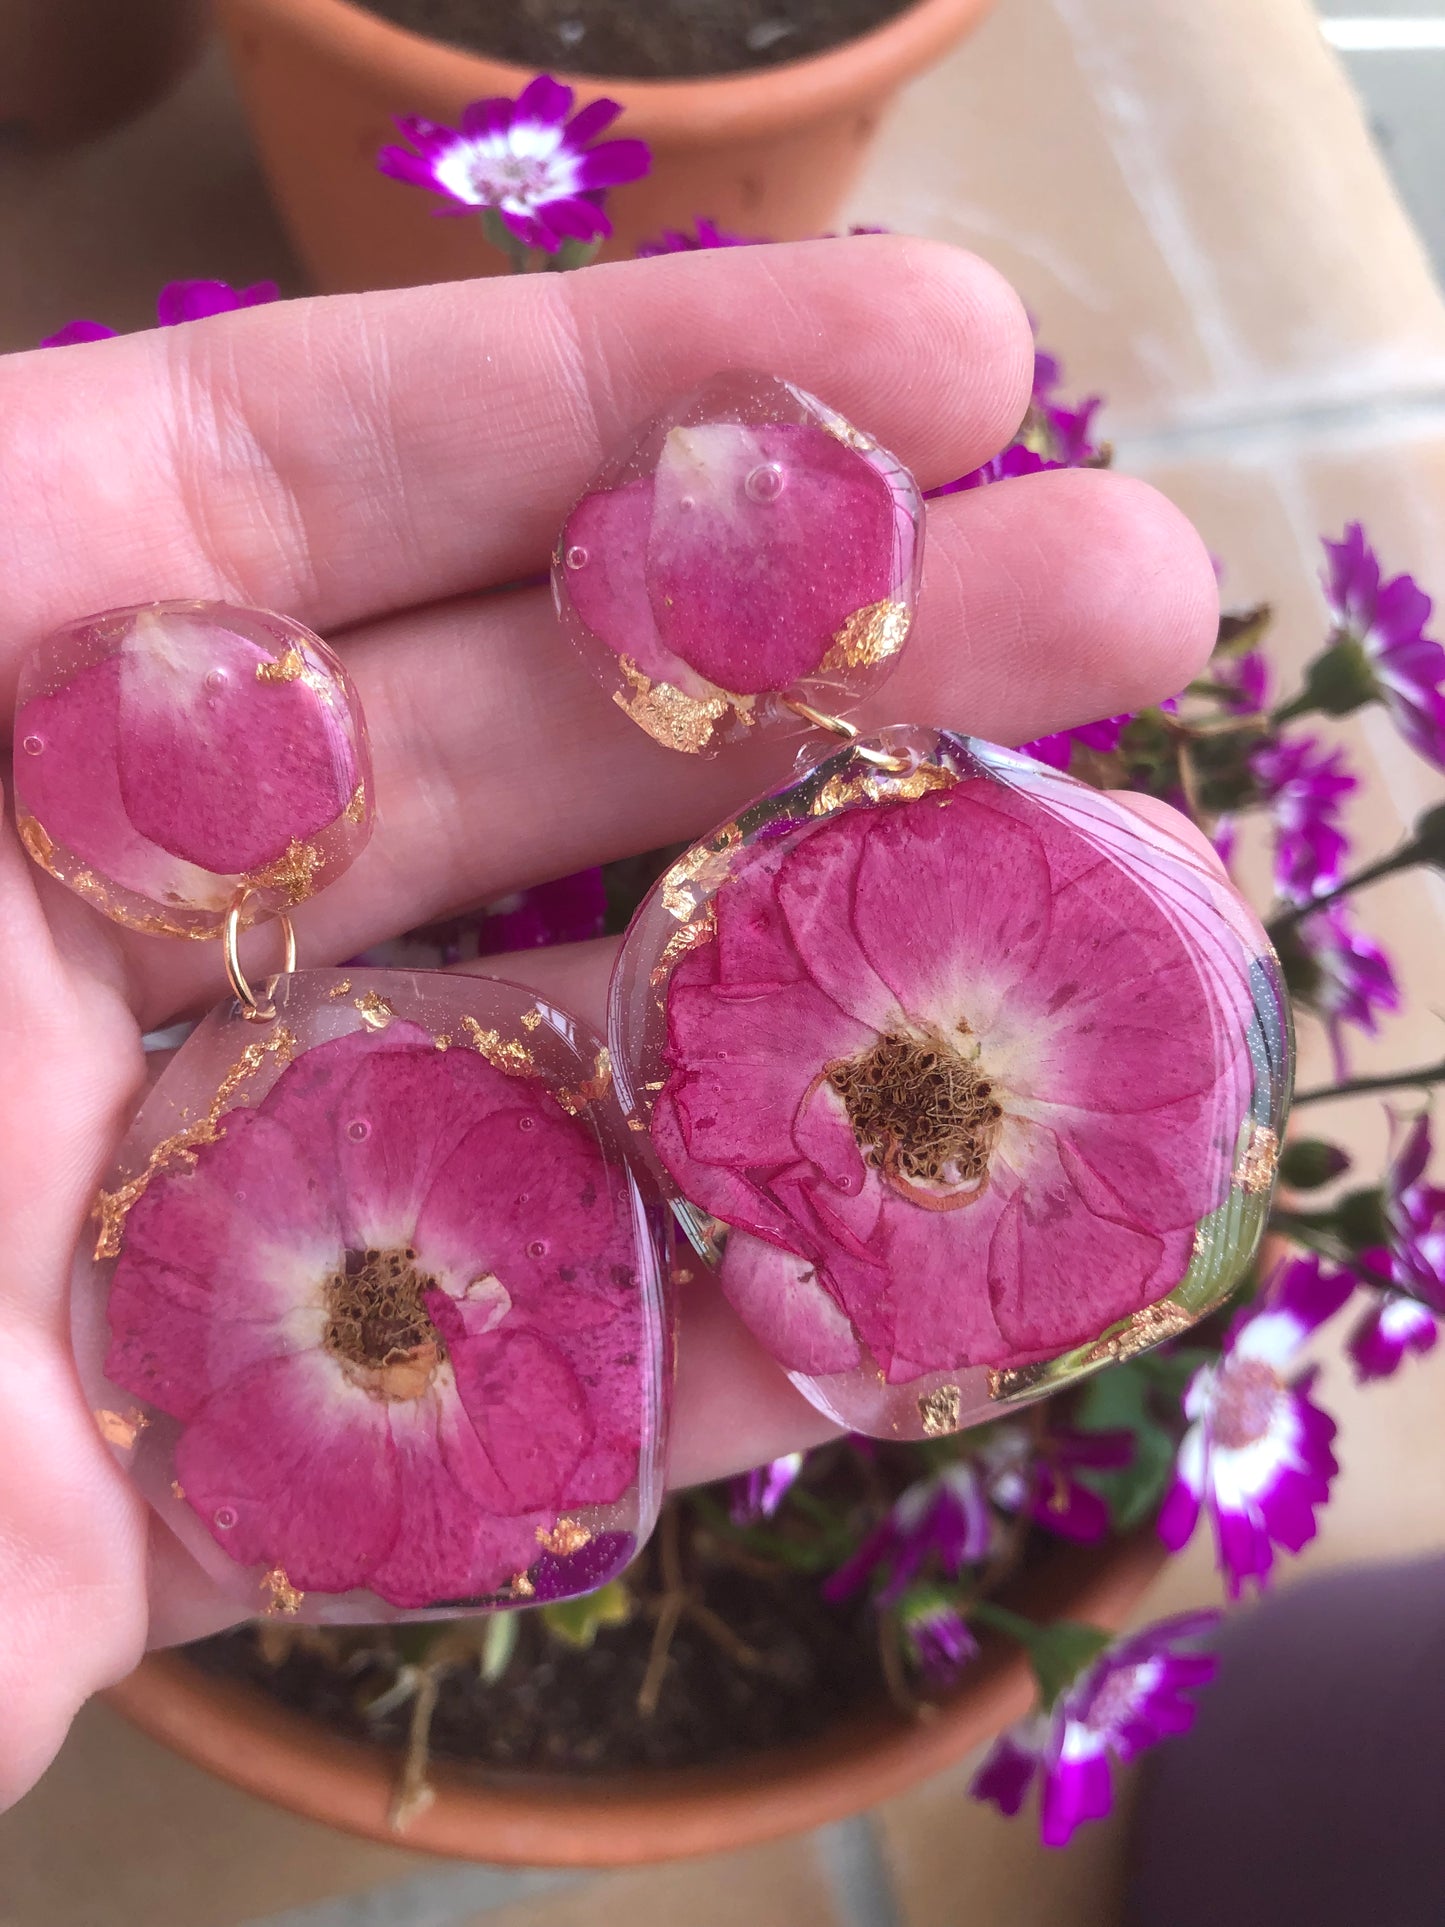 Earrings made with Real flowers